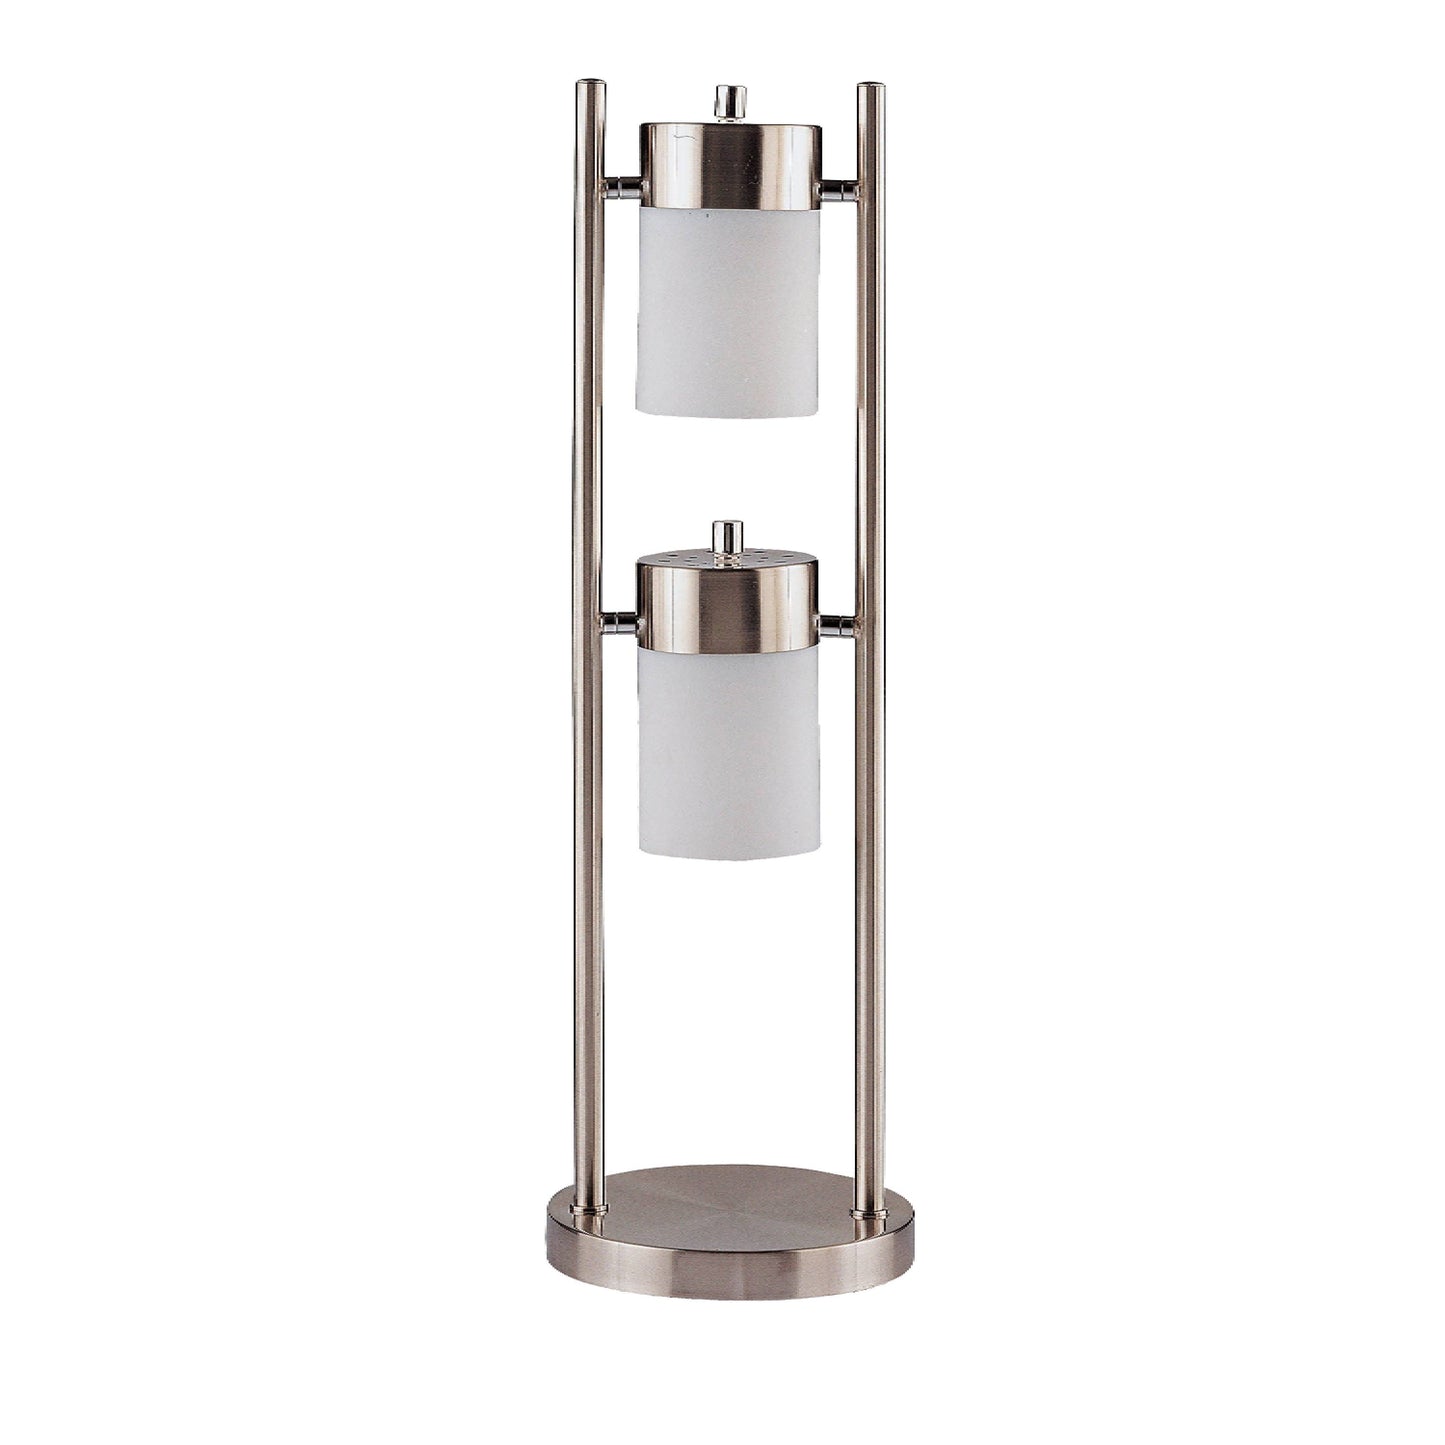 Adjustable Swivel Table Lamp Brushed Silver - 900732